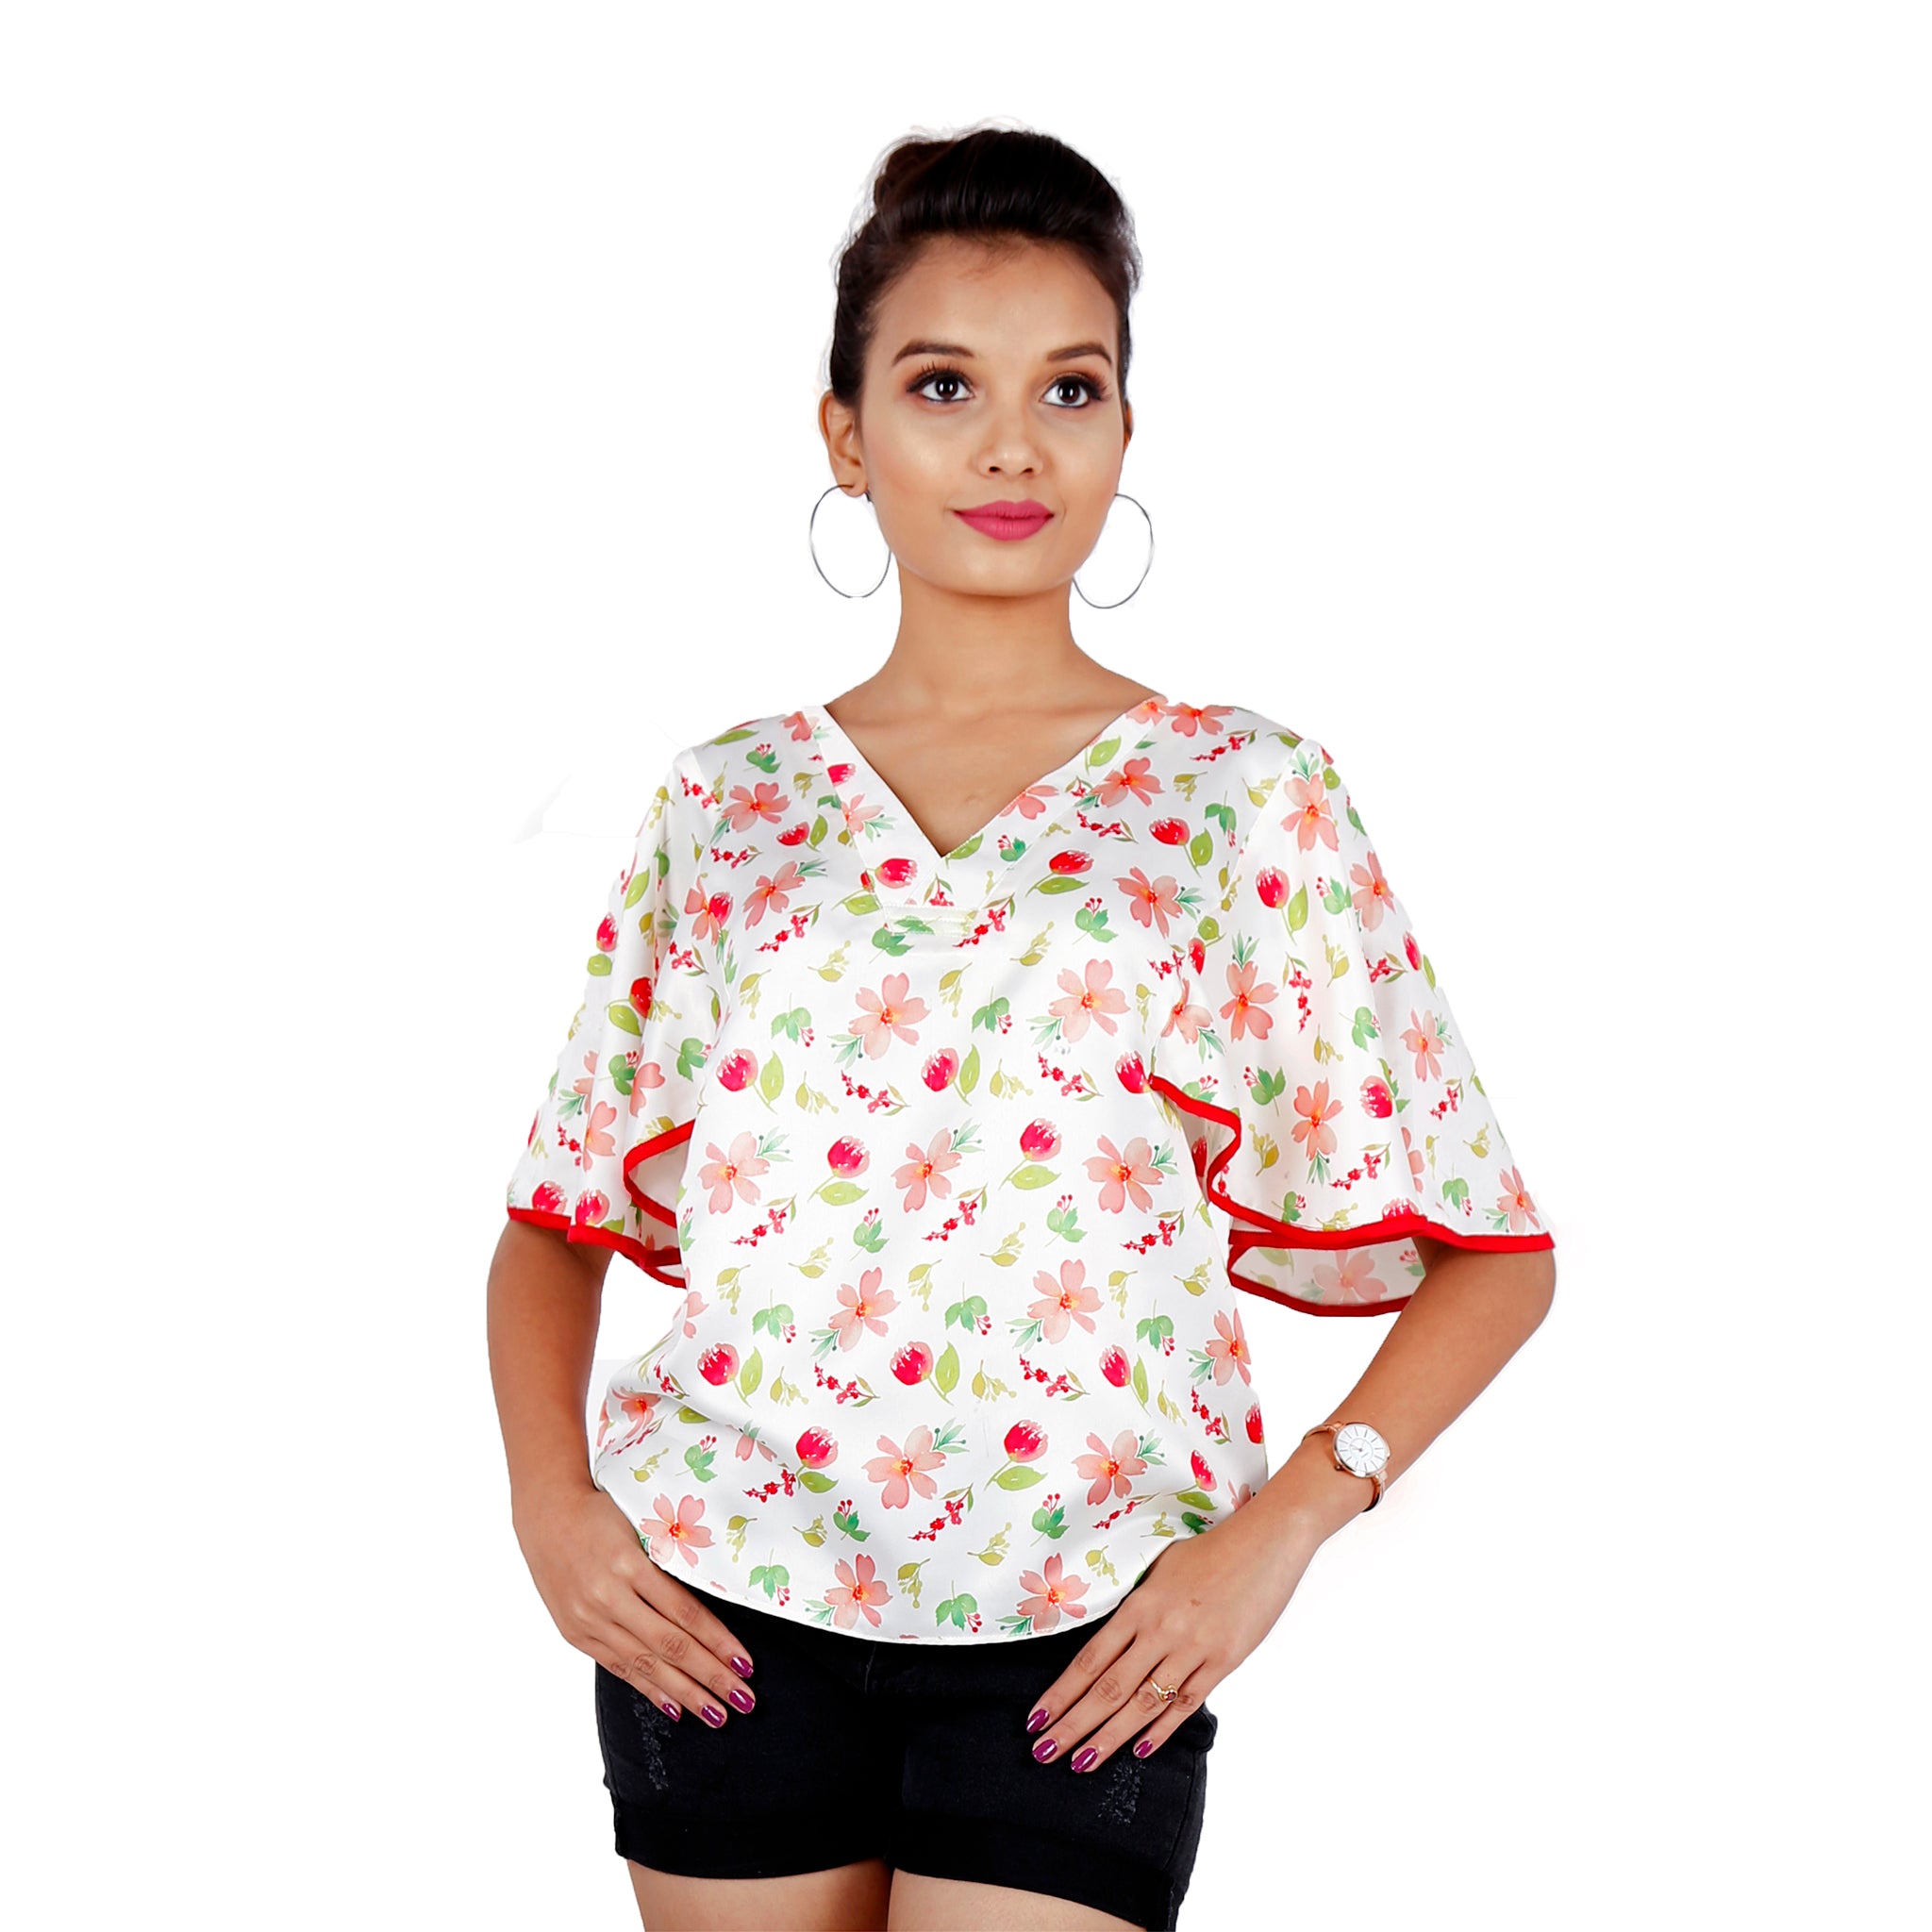 satin-floral-top-with-fan-sleeves for-women